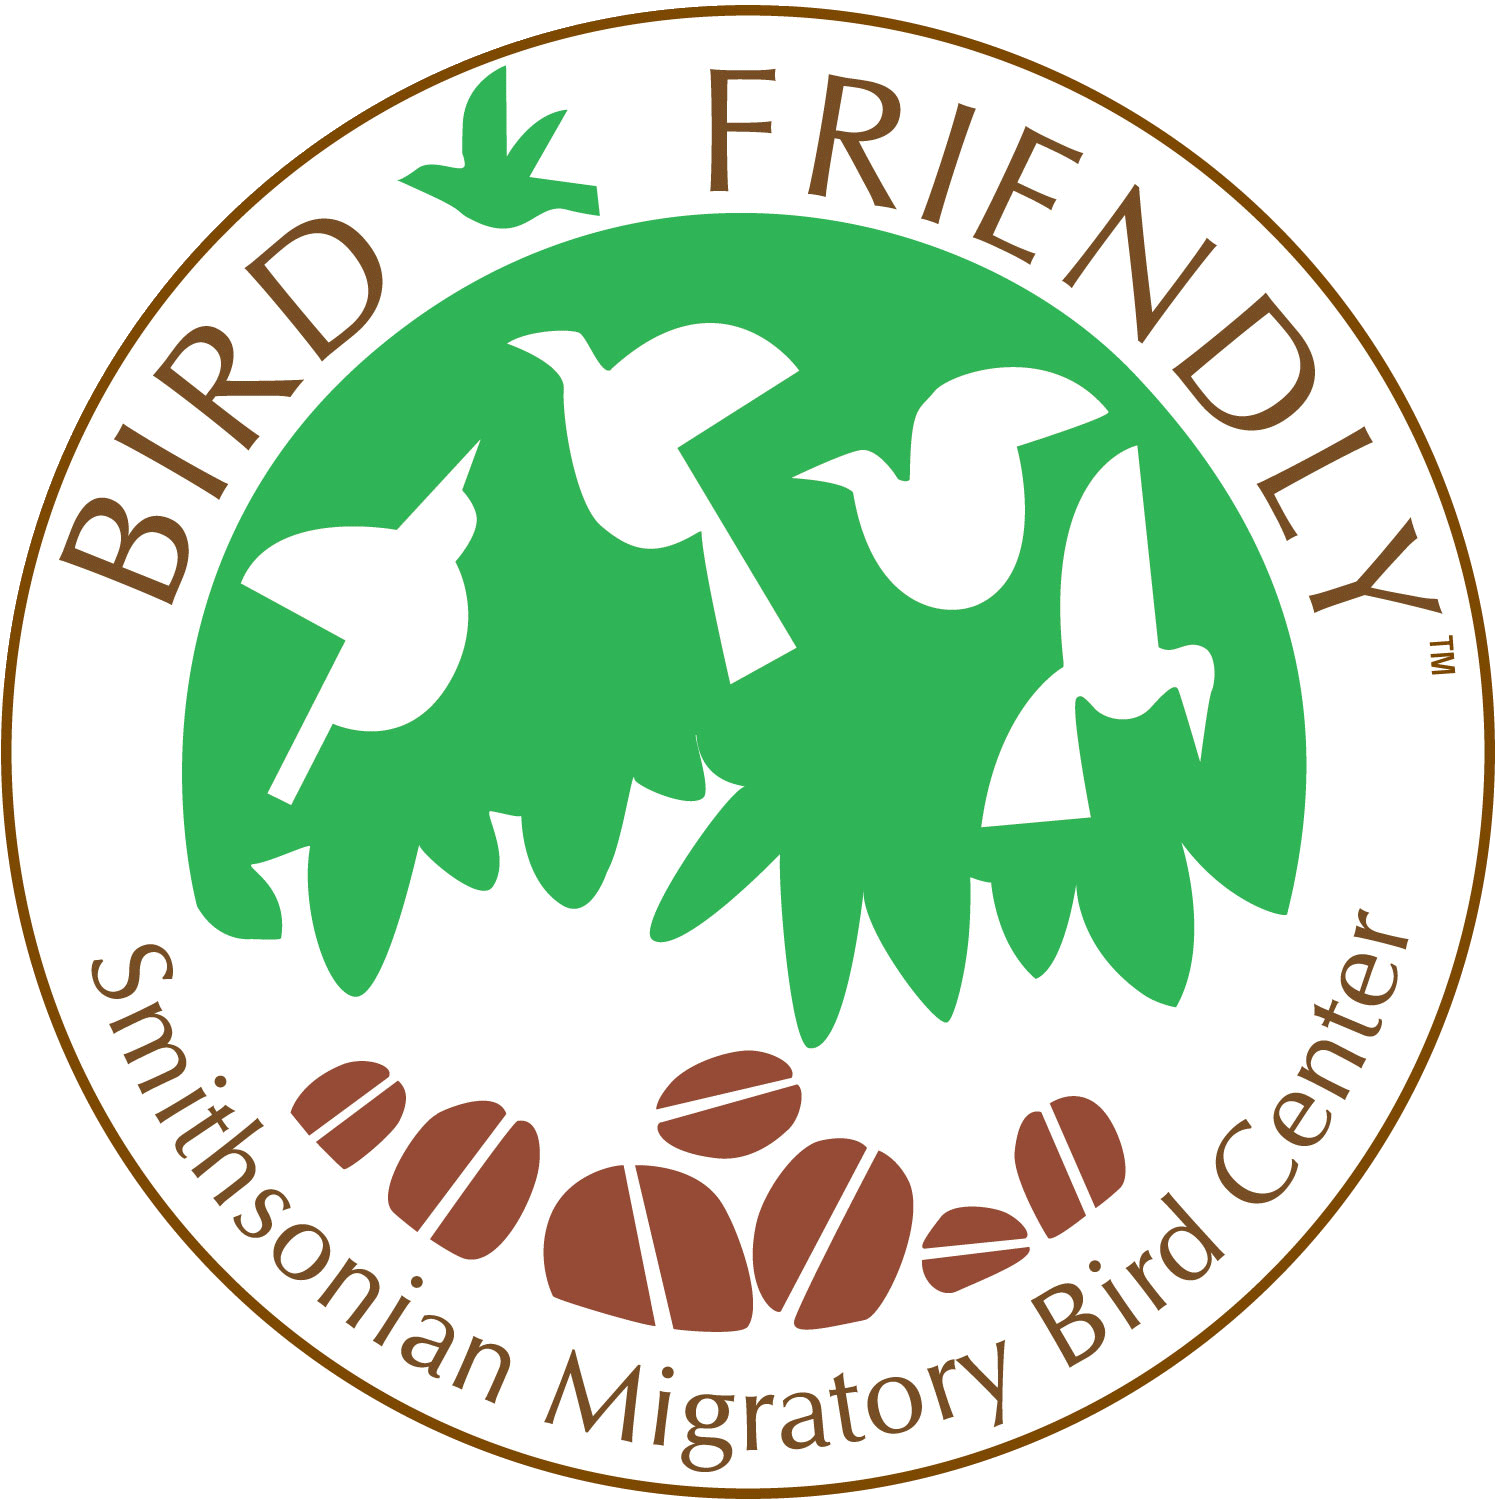 Smithsonian-certified Bird Friendly Coffee carries this logo